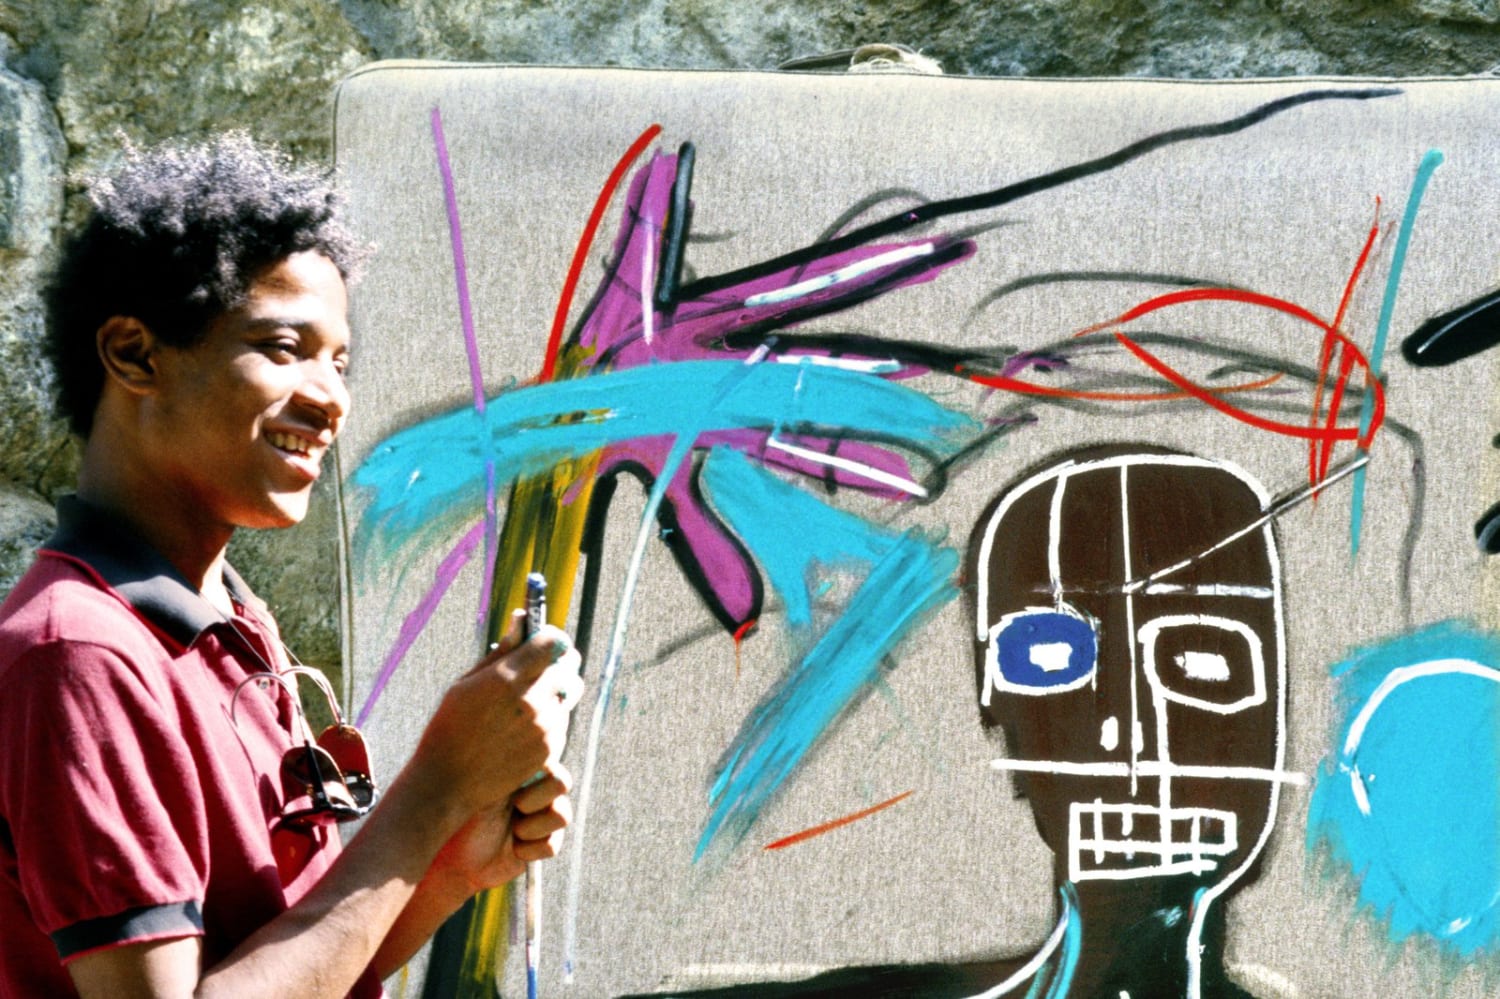 See Jean-Michel Basquiat Masterpieces Up Close in This Online Exhibition